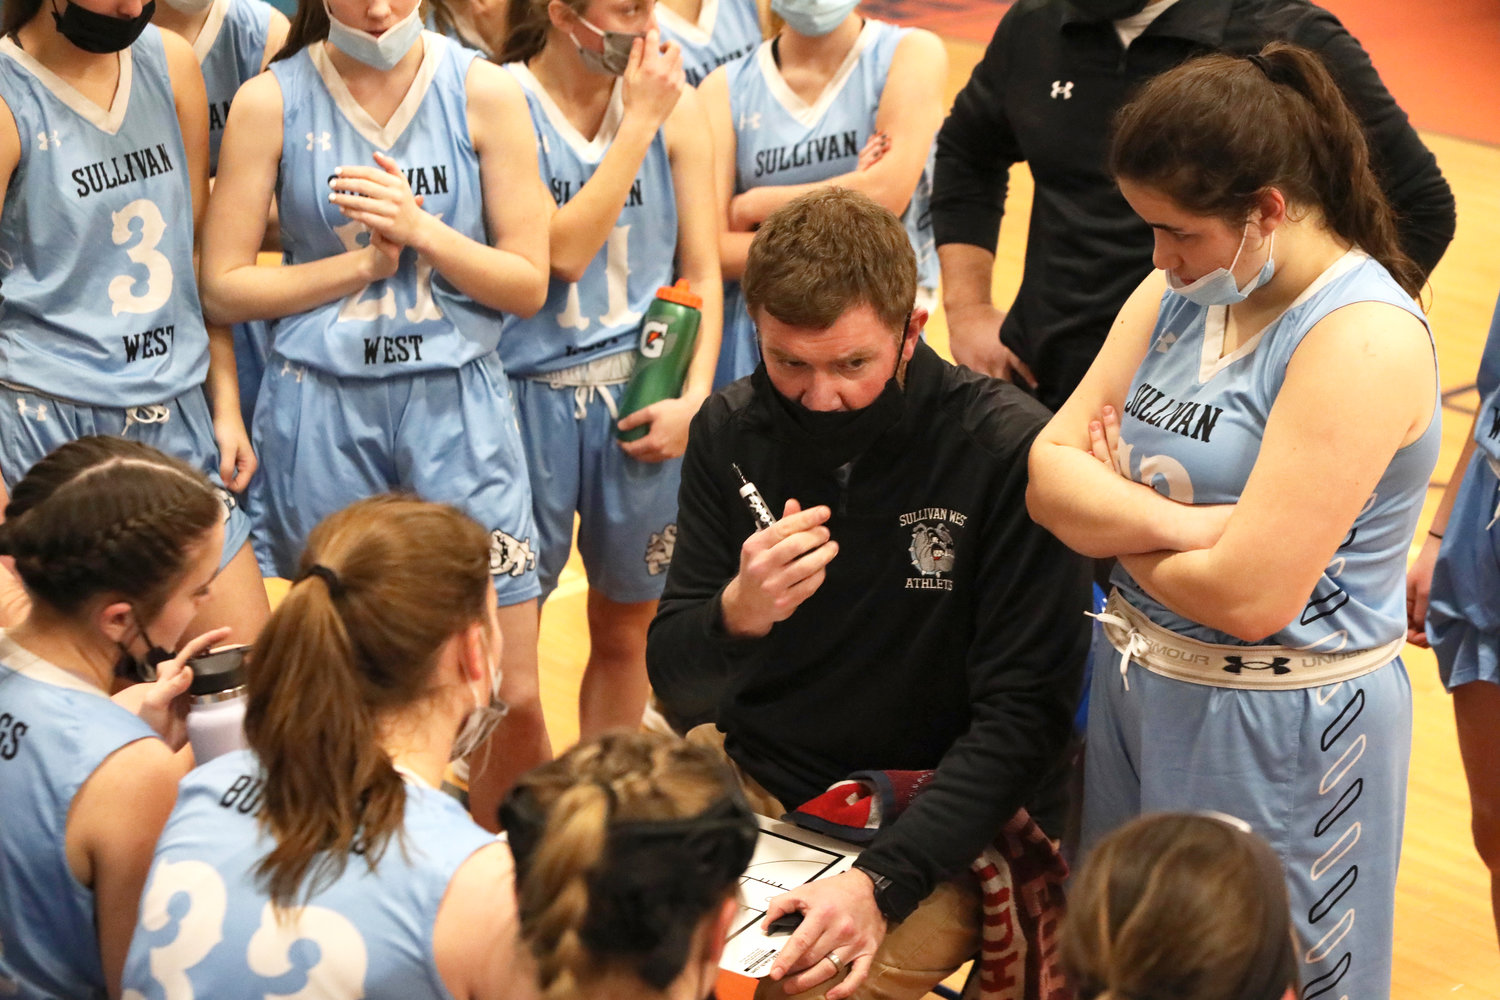 SW Coach Pat Donovan imparts strategy to his team during a time out. Donovan’s coaching this year was his best effort during his reign with arguably the best team under his watch to guide.